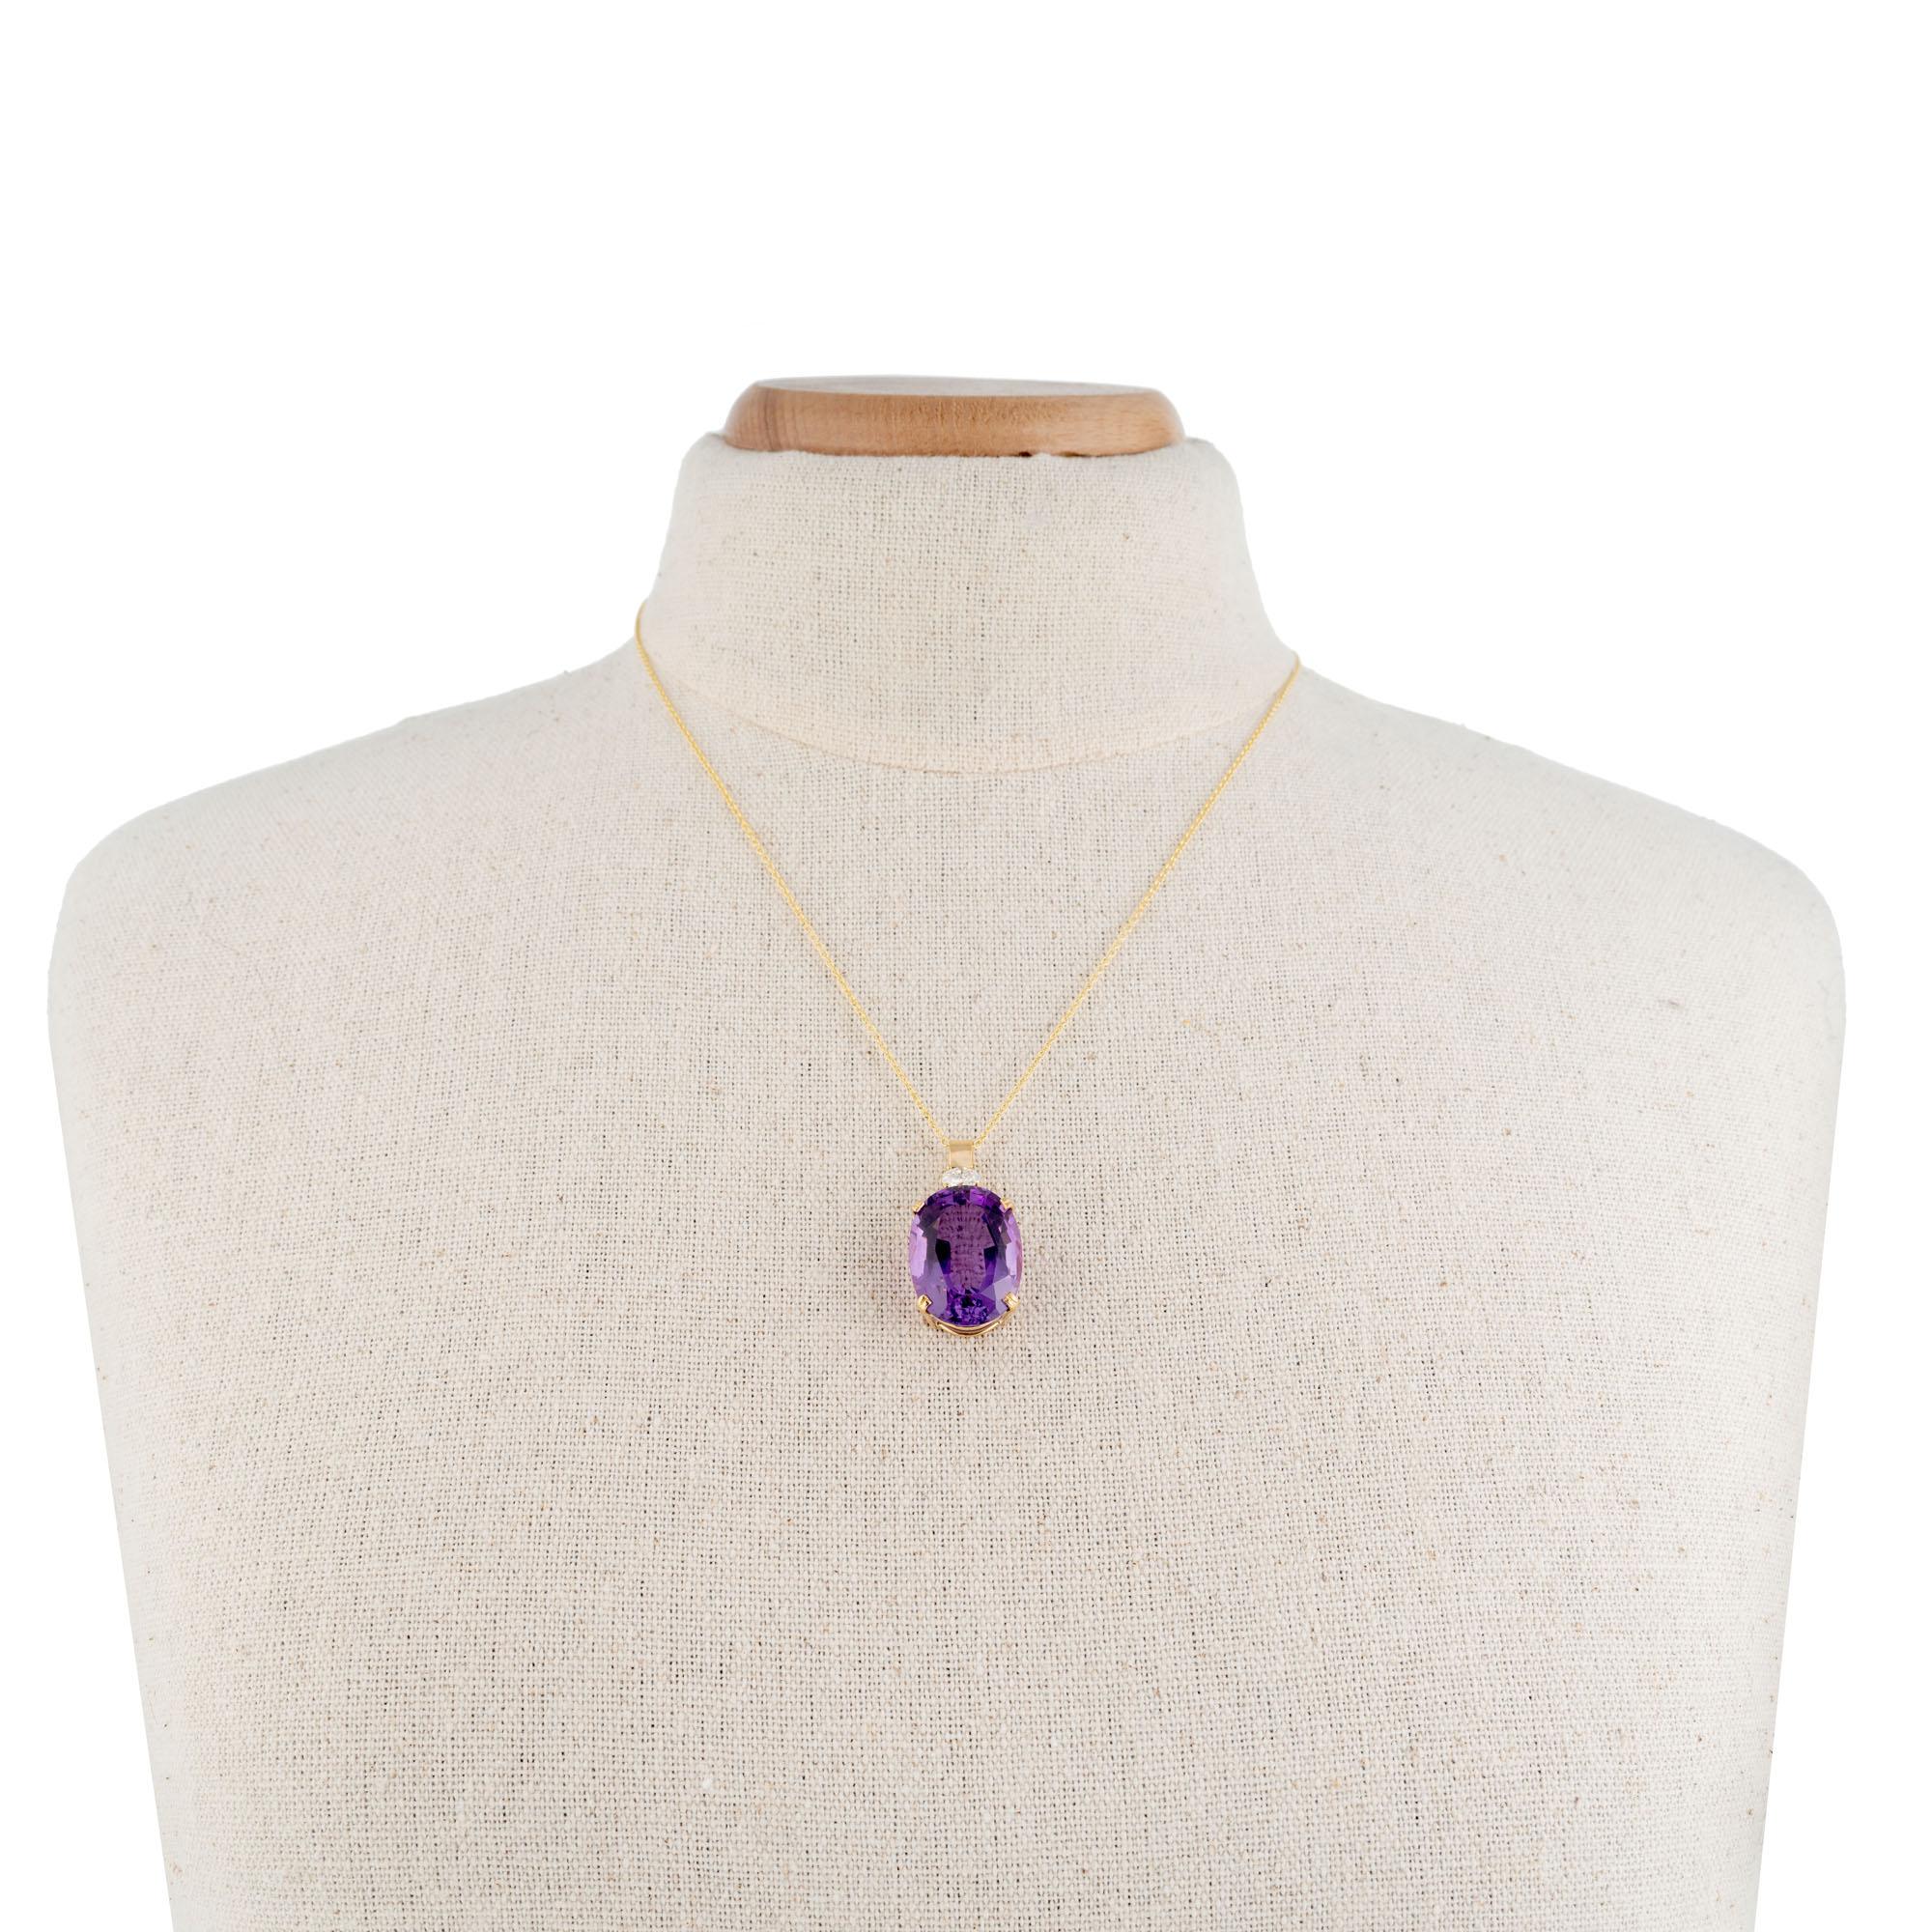 Peter Suchy 18.42 Carat Amethyst Diamond Yellow Gold Pendant Necklace For Sale 1